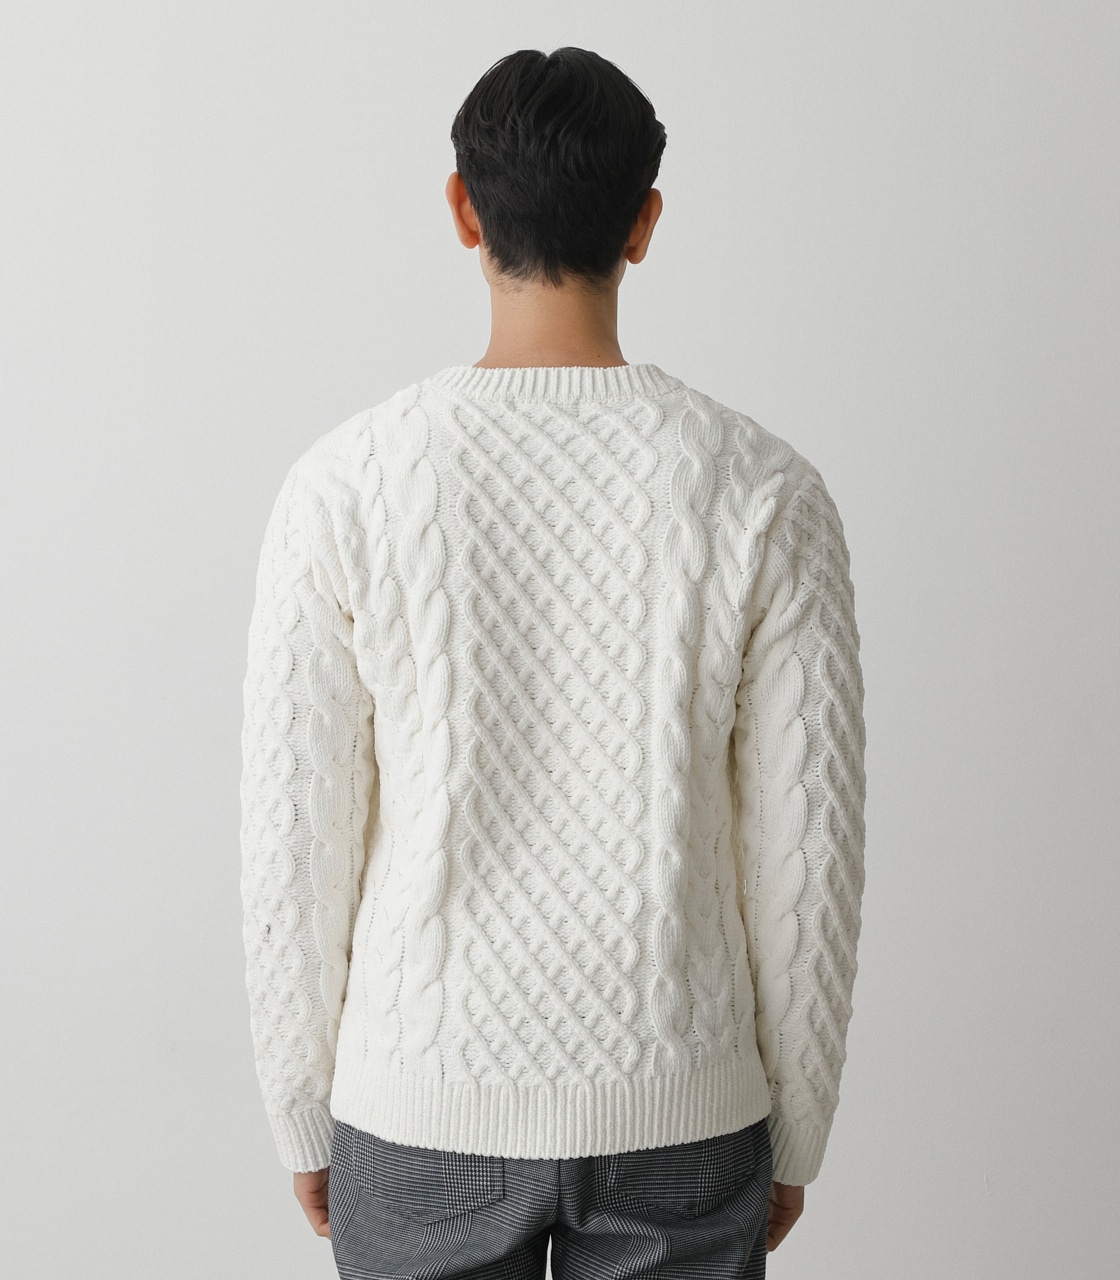 CHENILLE CABLE PULLOVER/シェニールケーブルプルオーバー 詳細画像 WHT 7